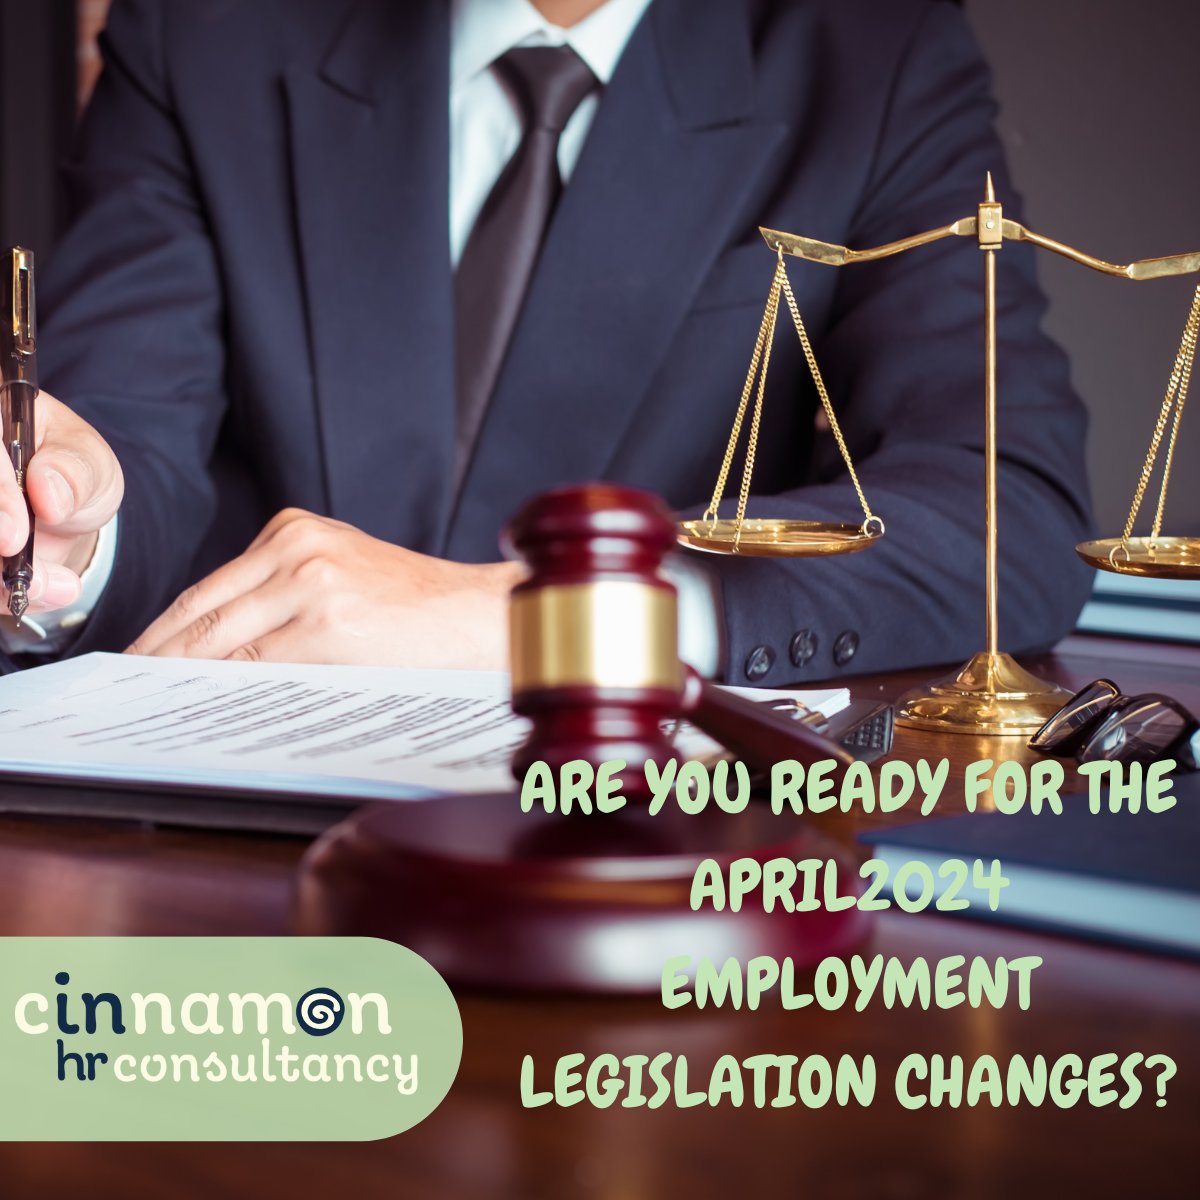 4 BIG employment law changes coming into effect in April 2024. Your HR policies must be updated to ensure you stay compliant and that you, your organisation and your employees remain protected. Why not download our handy FREE GUIDE from our website cinnamonhr.co.uk/freeresources